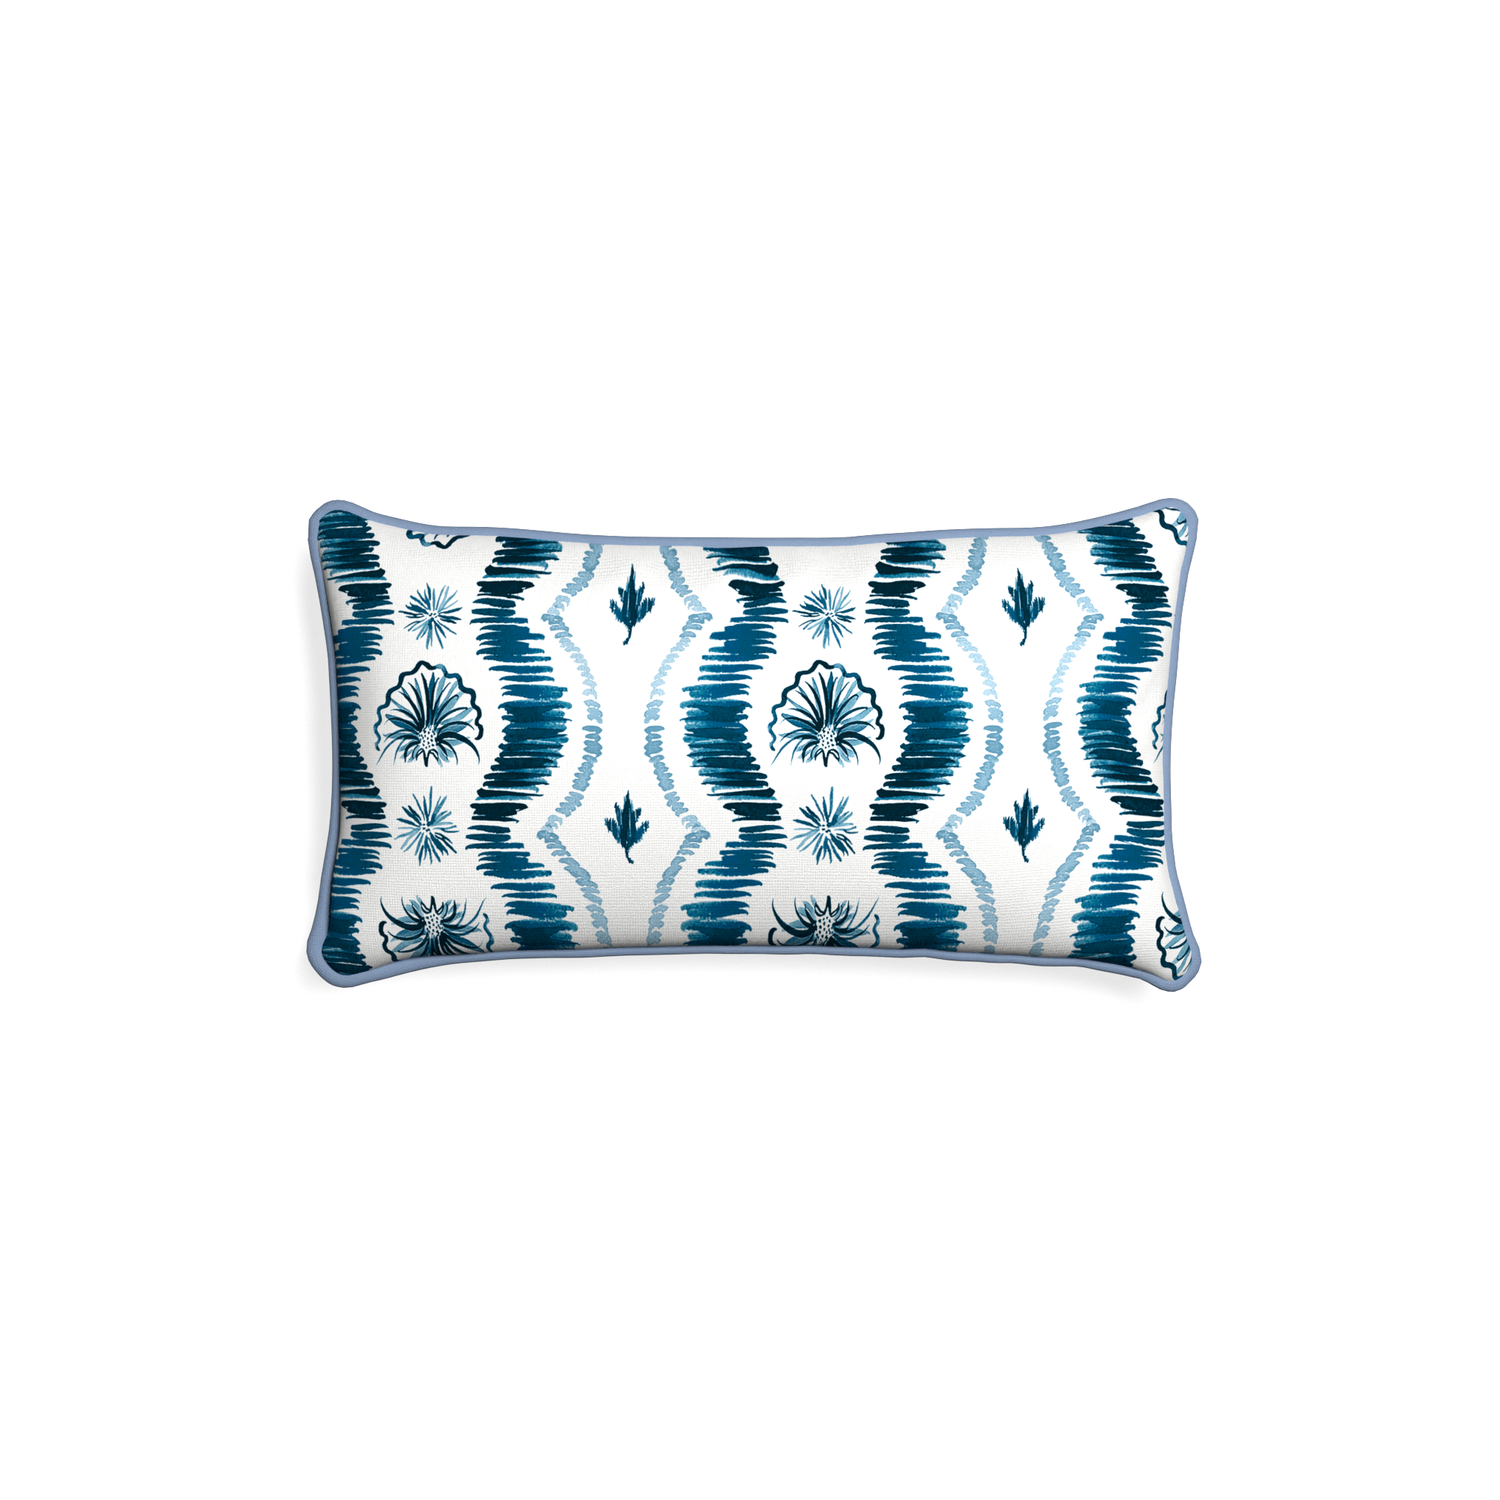 Petite-lumbar alice custom blue ikatpillow with sky piping on white background